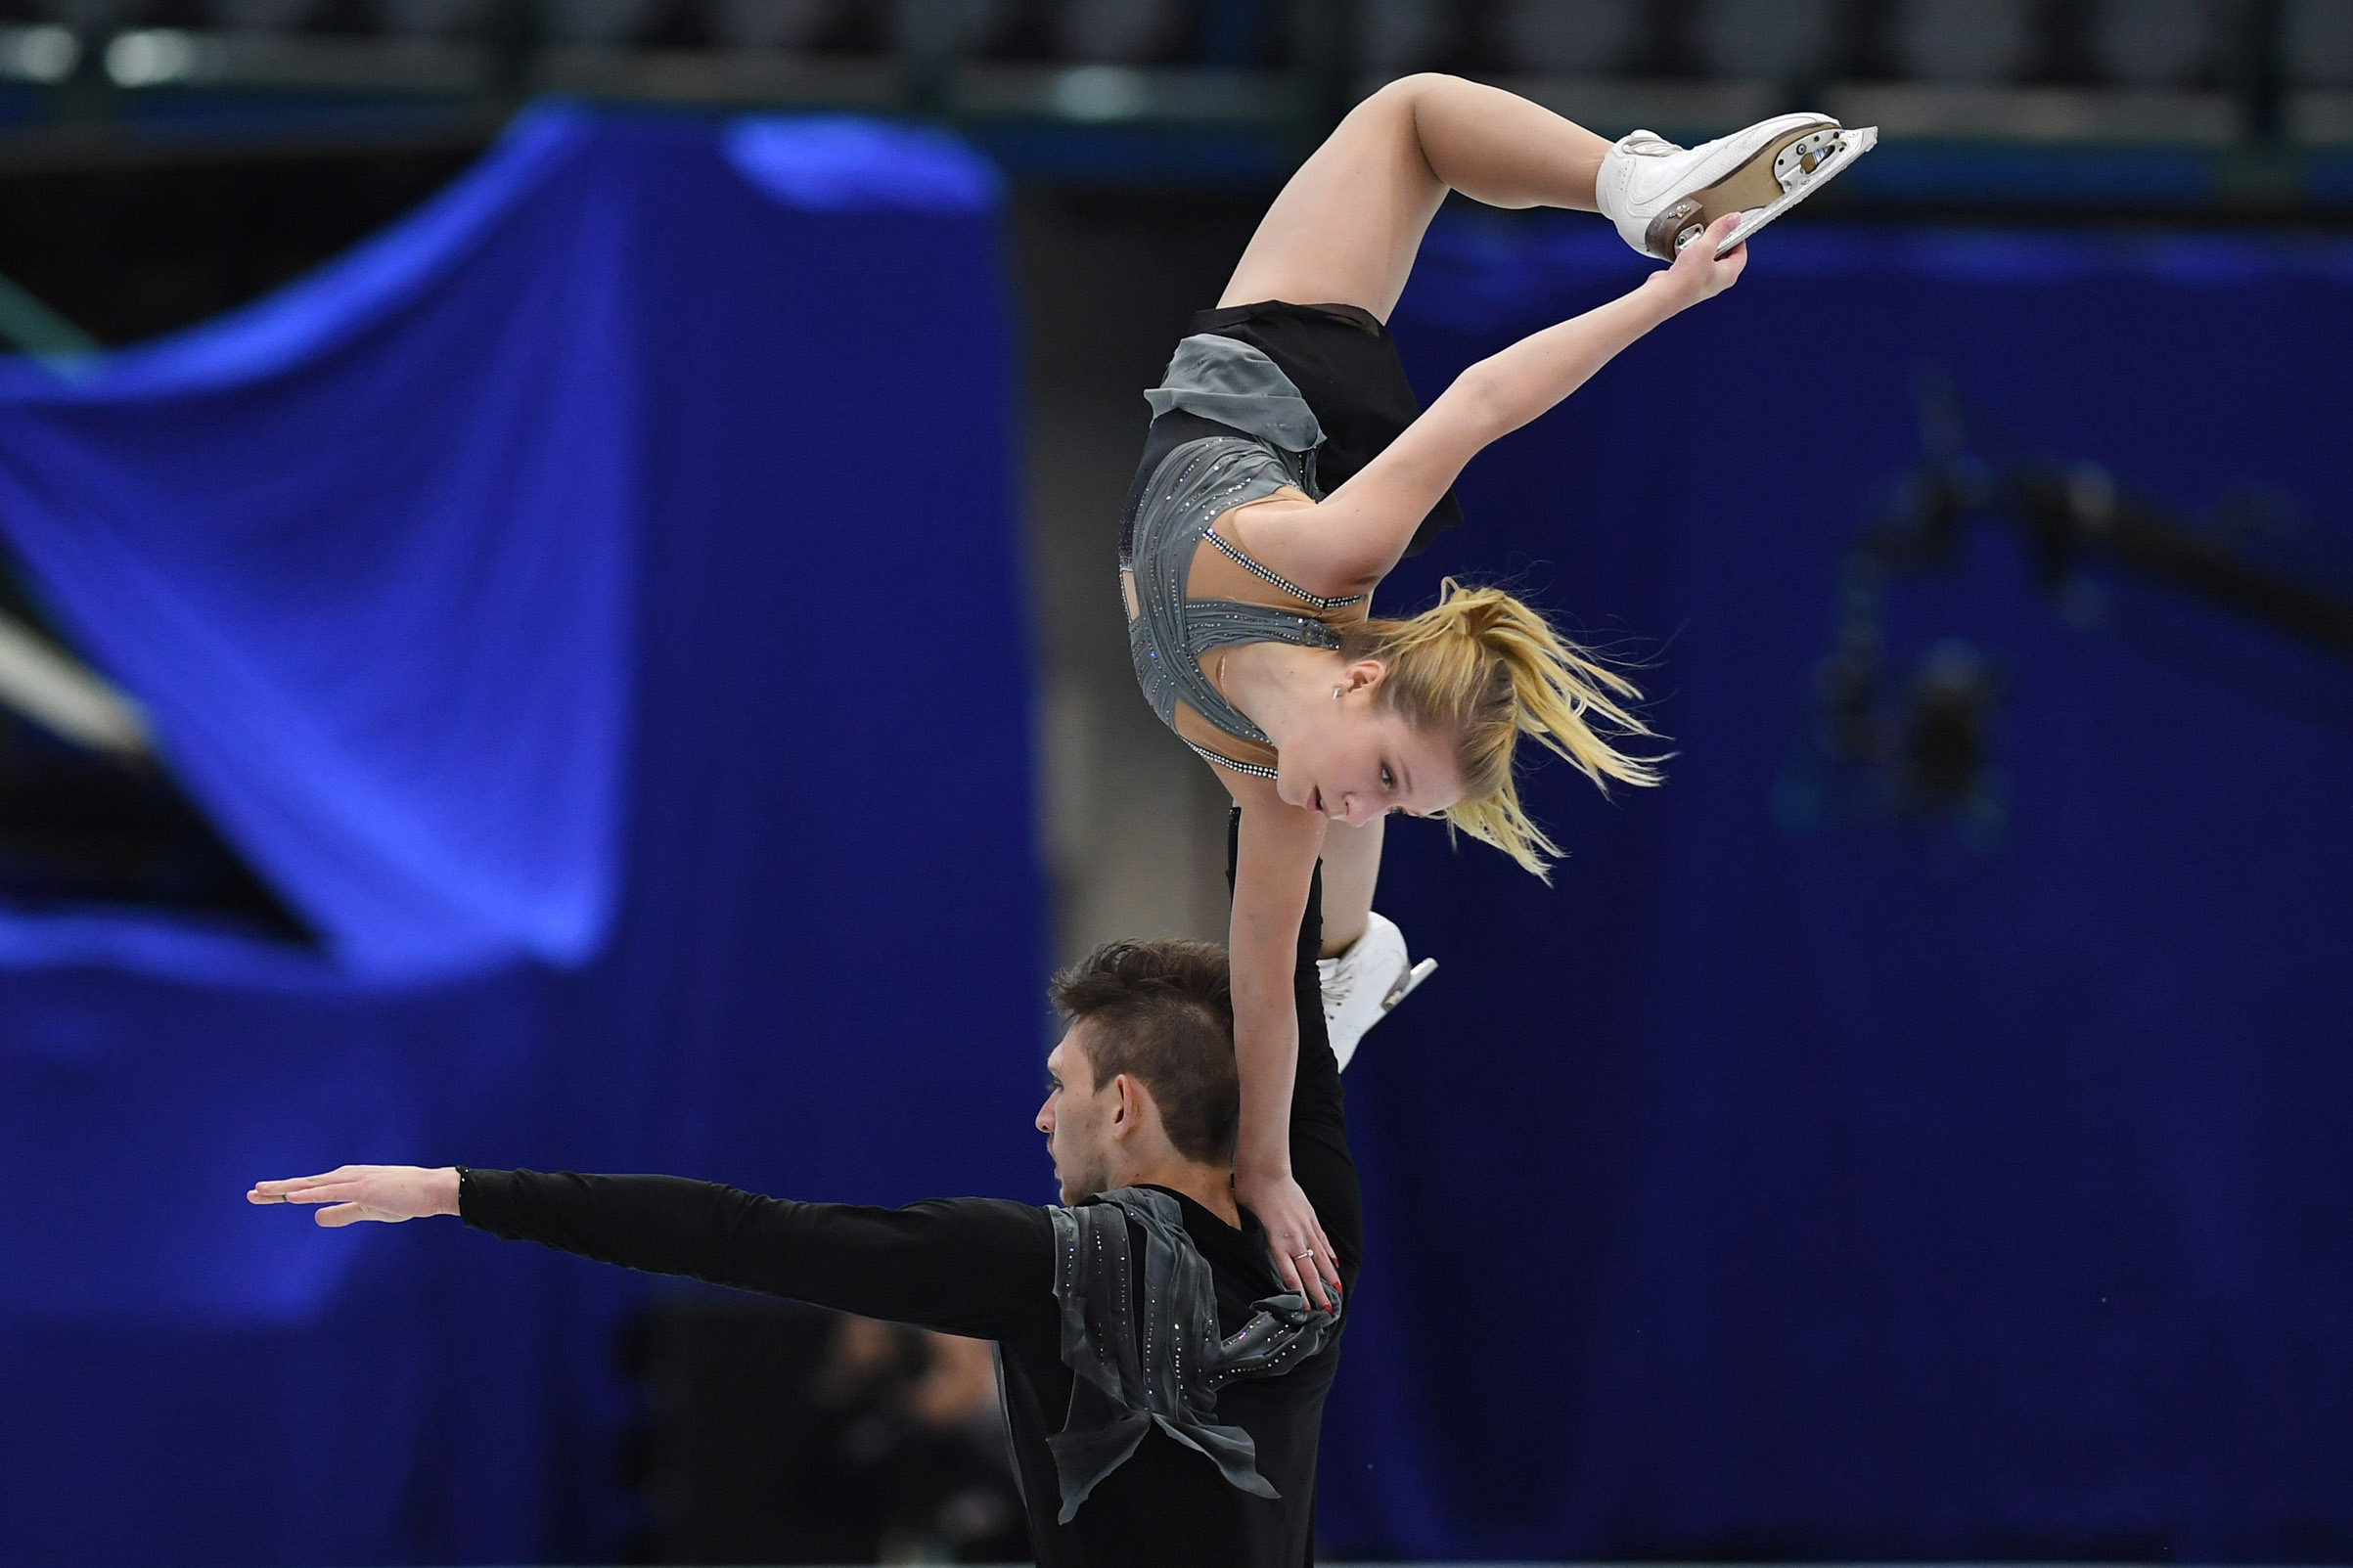 Ekaterina Alexandrovsakaya and Harley Windsor of Australia compete in the pairs short program during the Four Continents Figure Skating Championships at Taipei Arena in Taipei, Taiwan, on Jan. 24, 2018. (Atsushi Tomura—ISU/Getty Images)